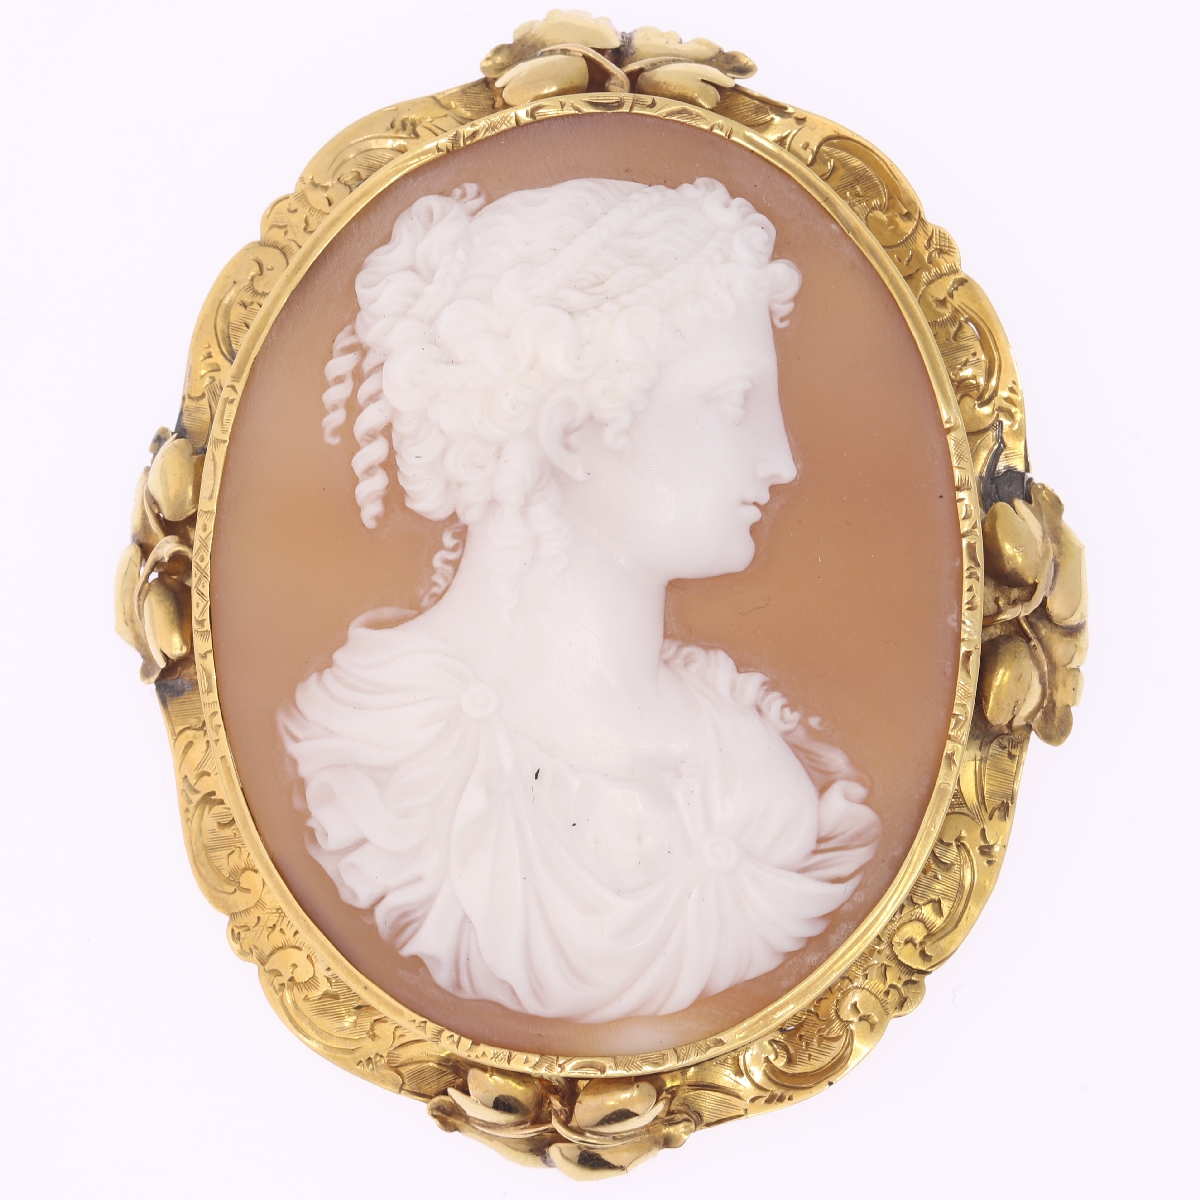 Timeless Beauty: A Roman-Inspired Cameo Brooch from the Victorian Era